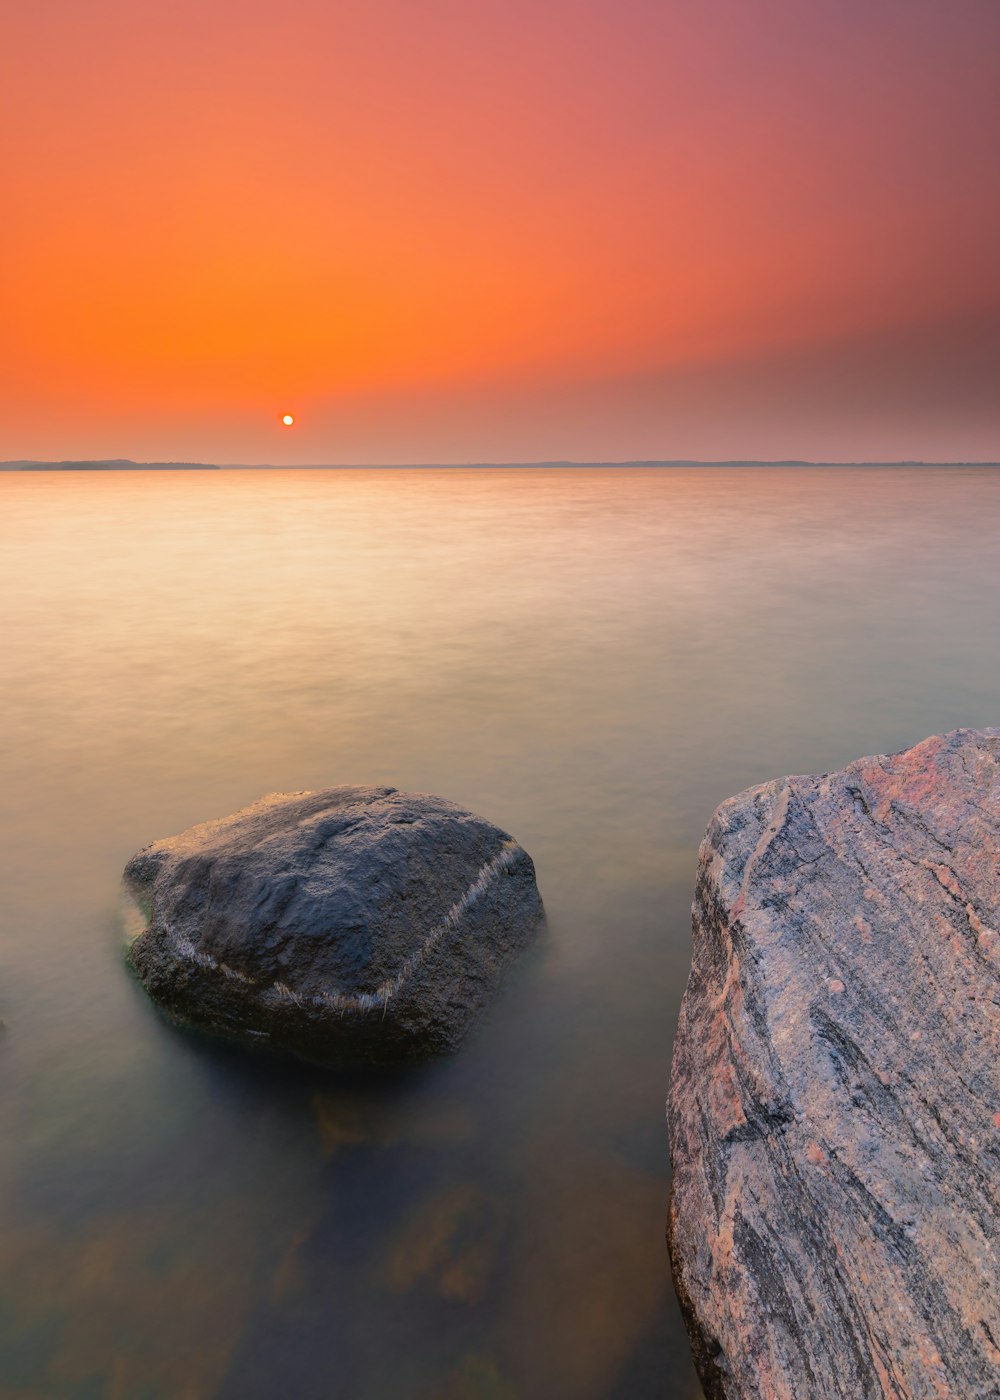 gray rock formation on body of water during sunset